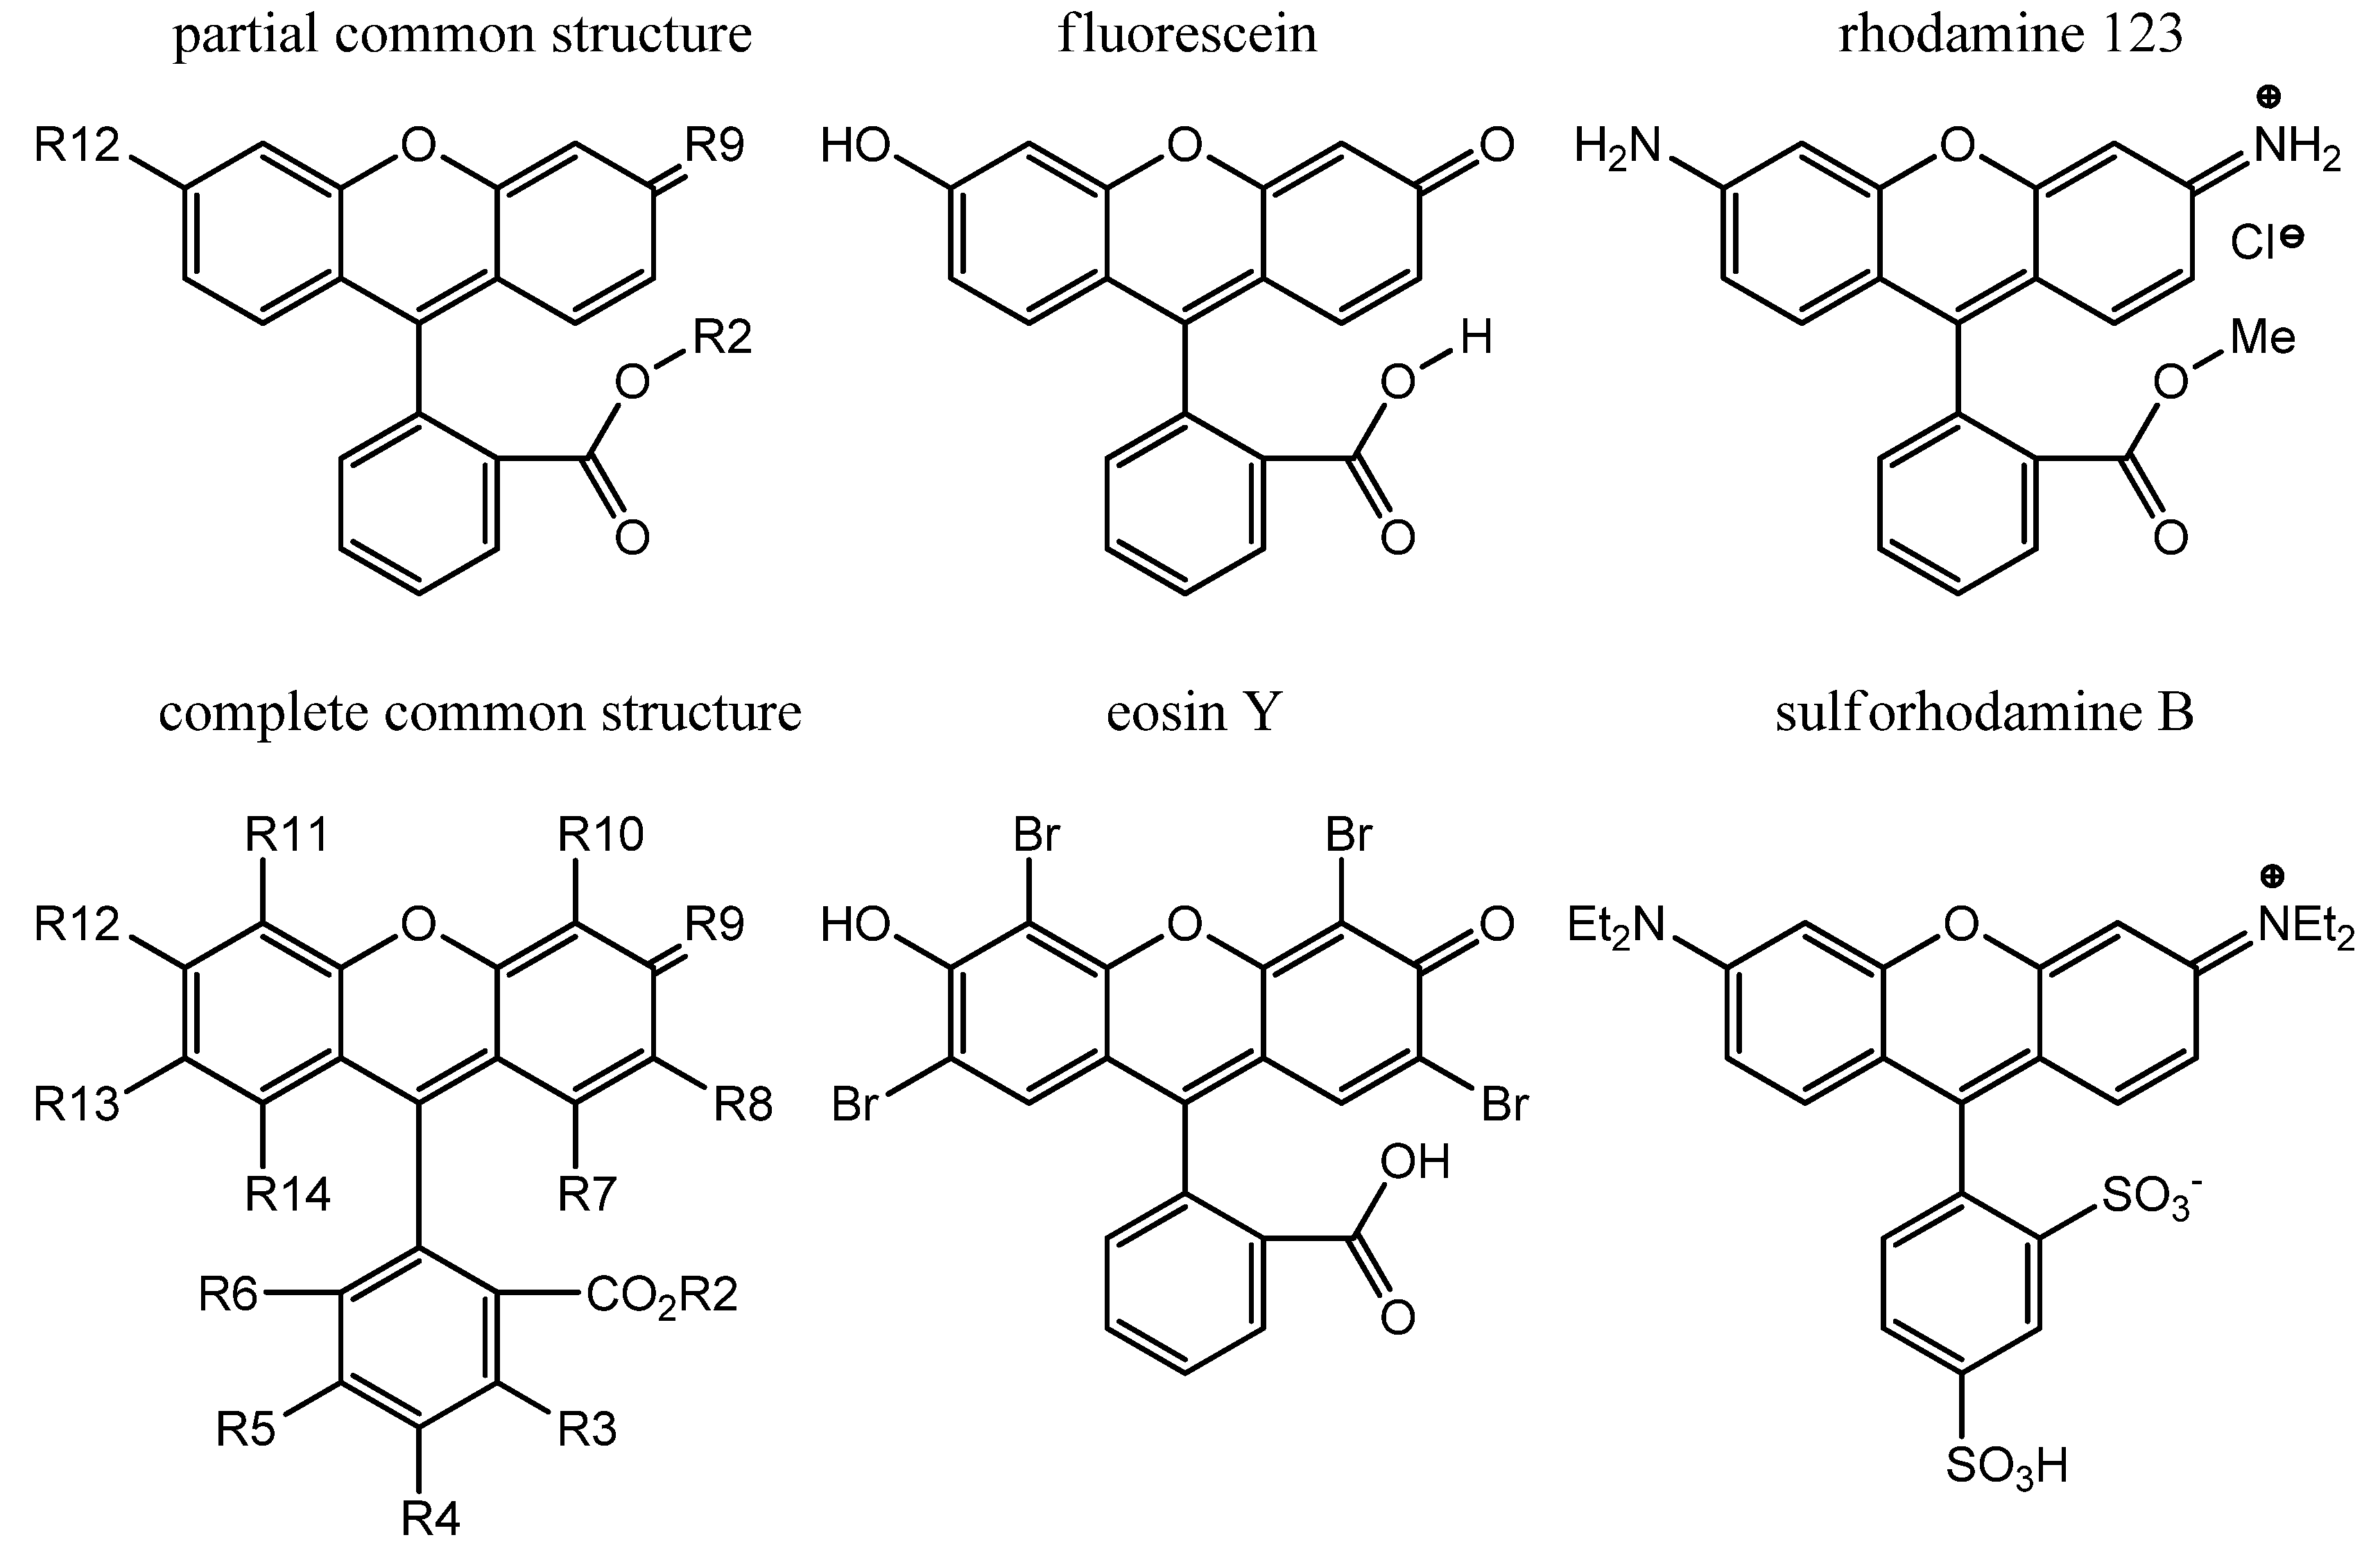 Chemical structures of Fluorescein at different pH values of